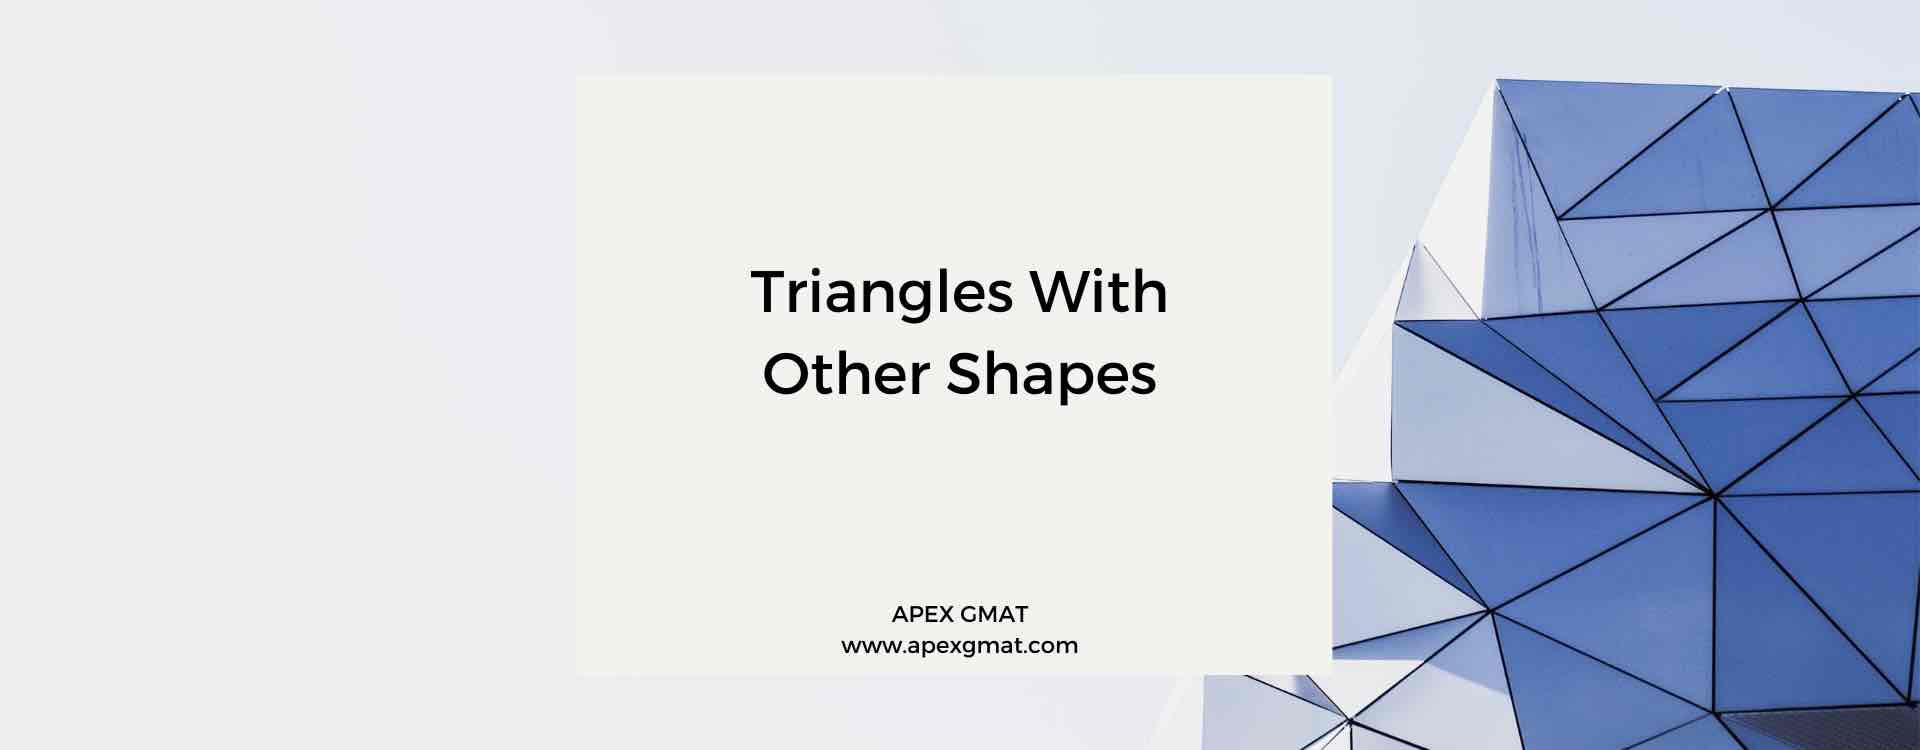 Triangles With Other Shapes